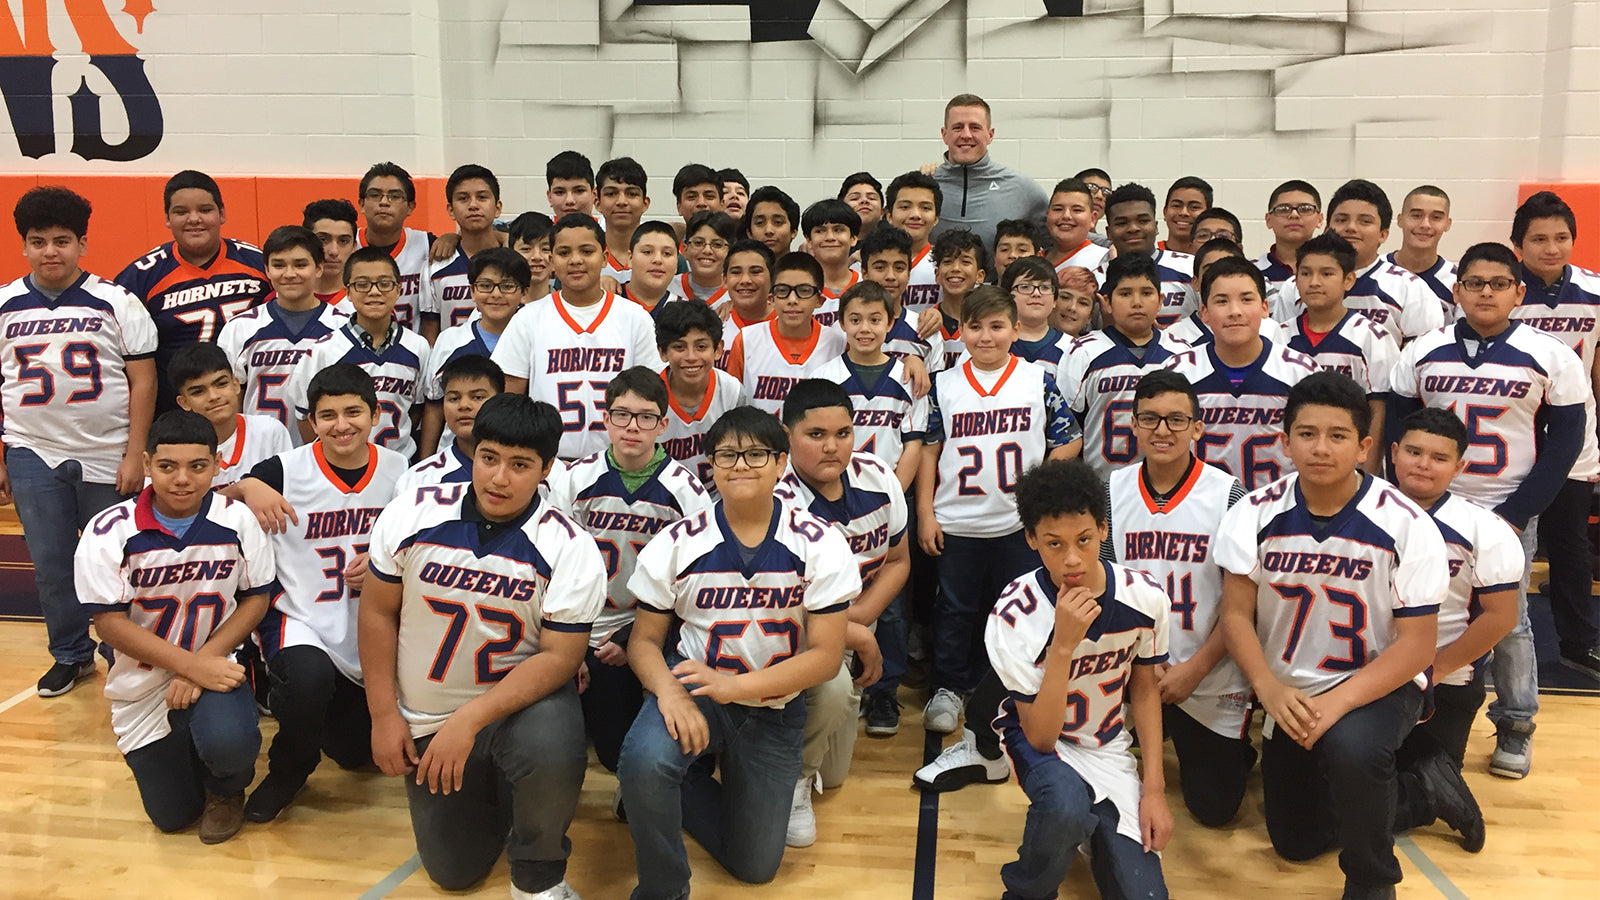 Justin J. Watt is surrounded by middle school athletes.